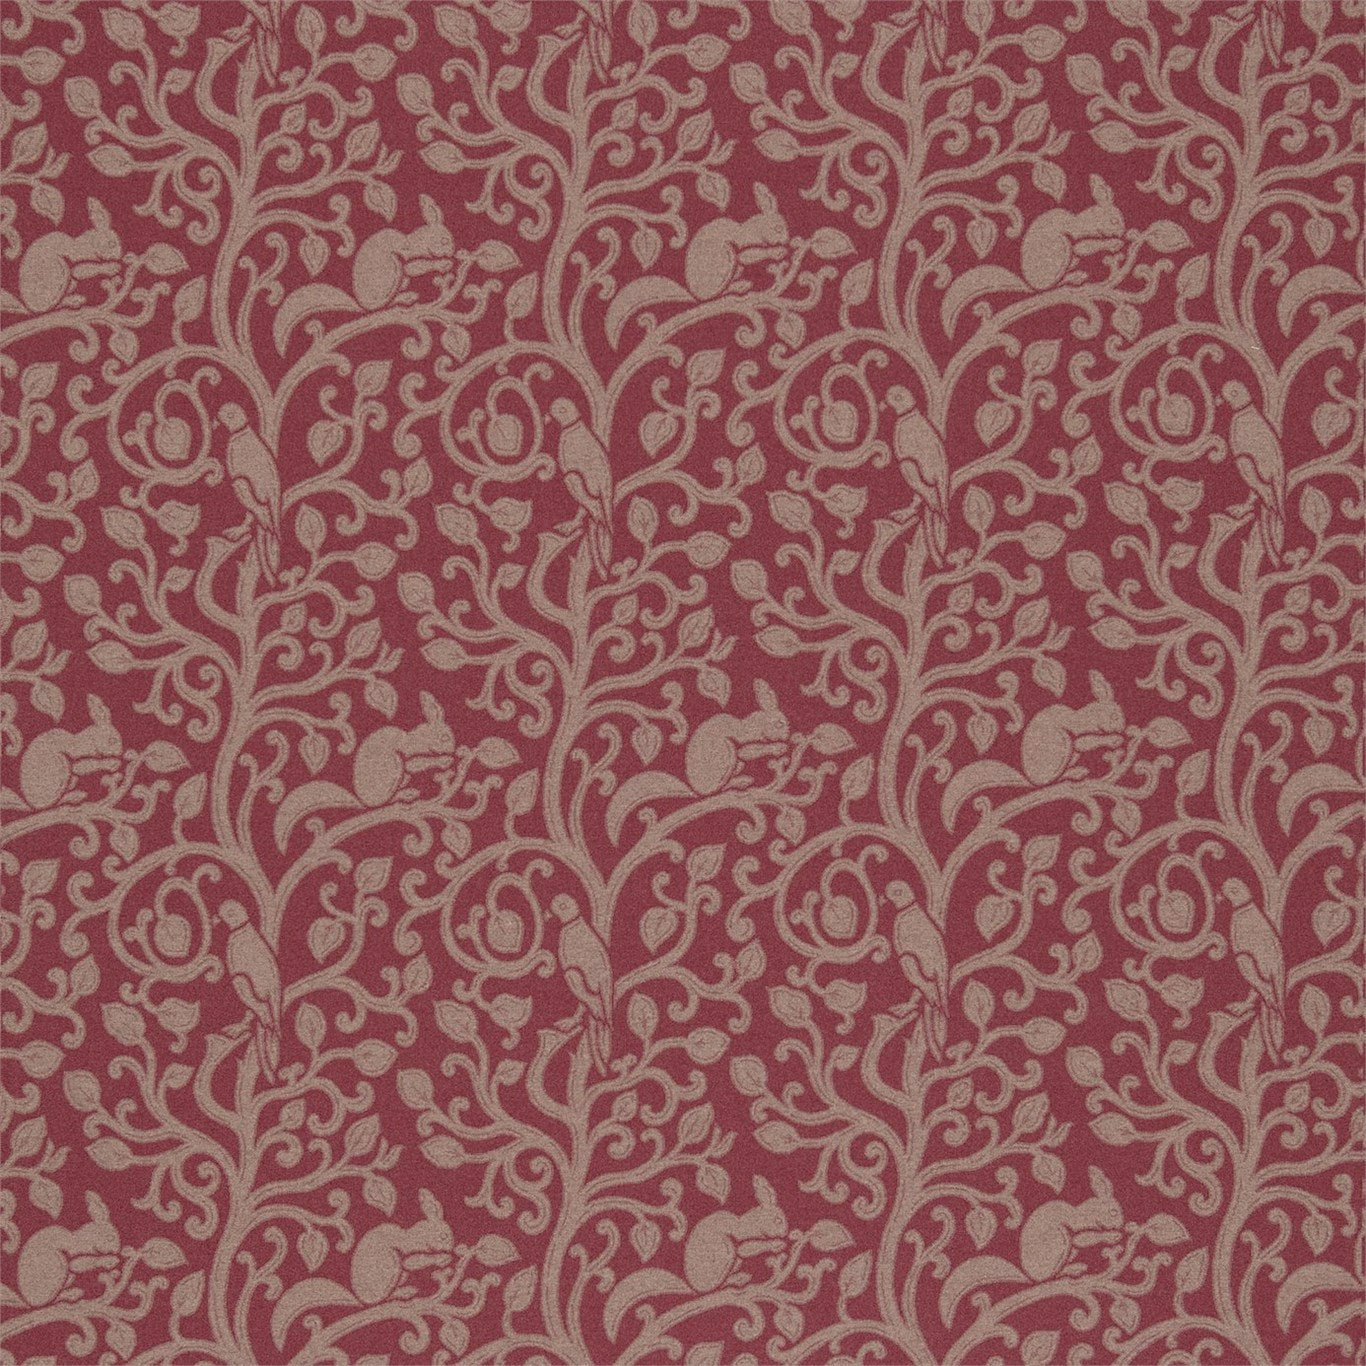 Squirrel & Dove Wool Fabric by Sanderson